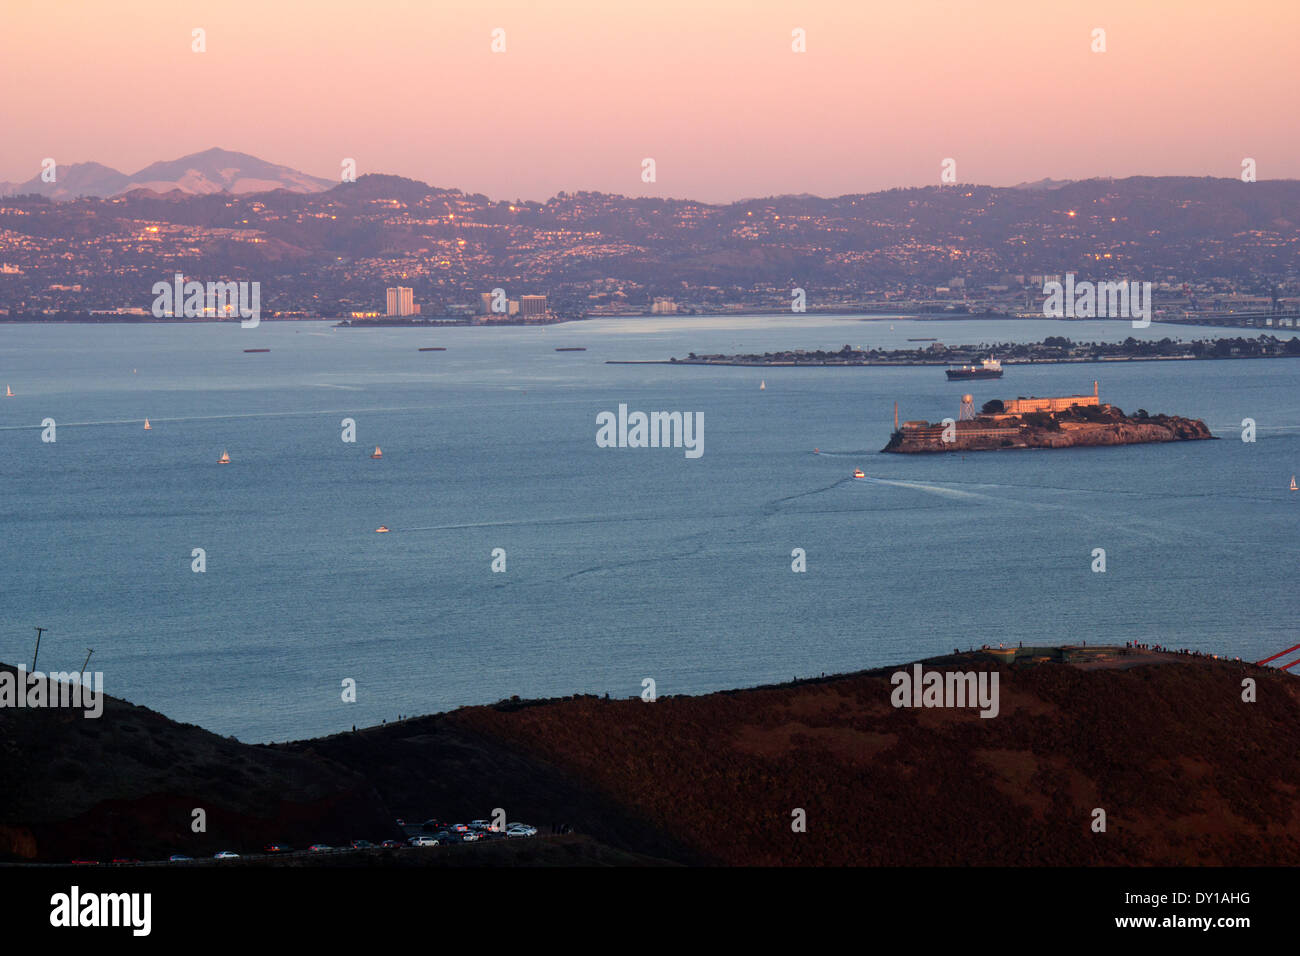 View of Berkeley Hills and Emeryville from Marin Headlands with Alcatraz State Prison on the right, Bay Area, California, USA Stock Photo